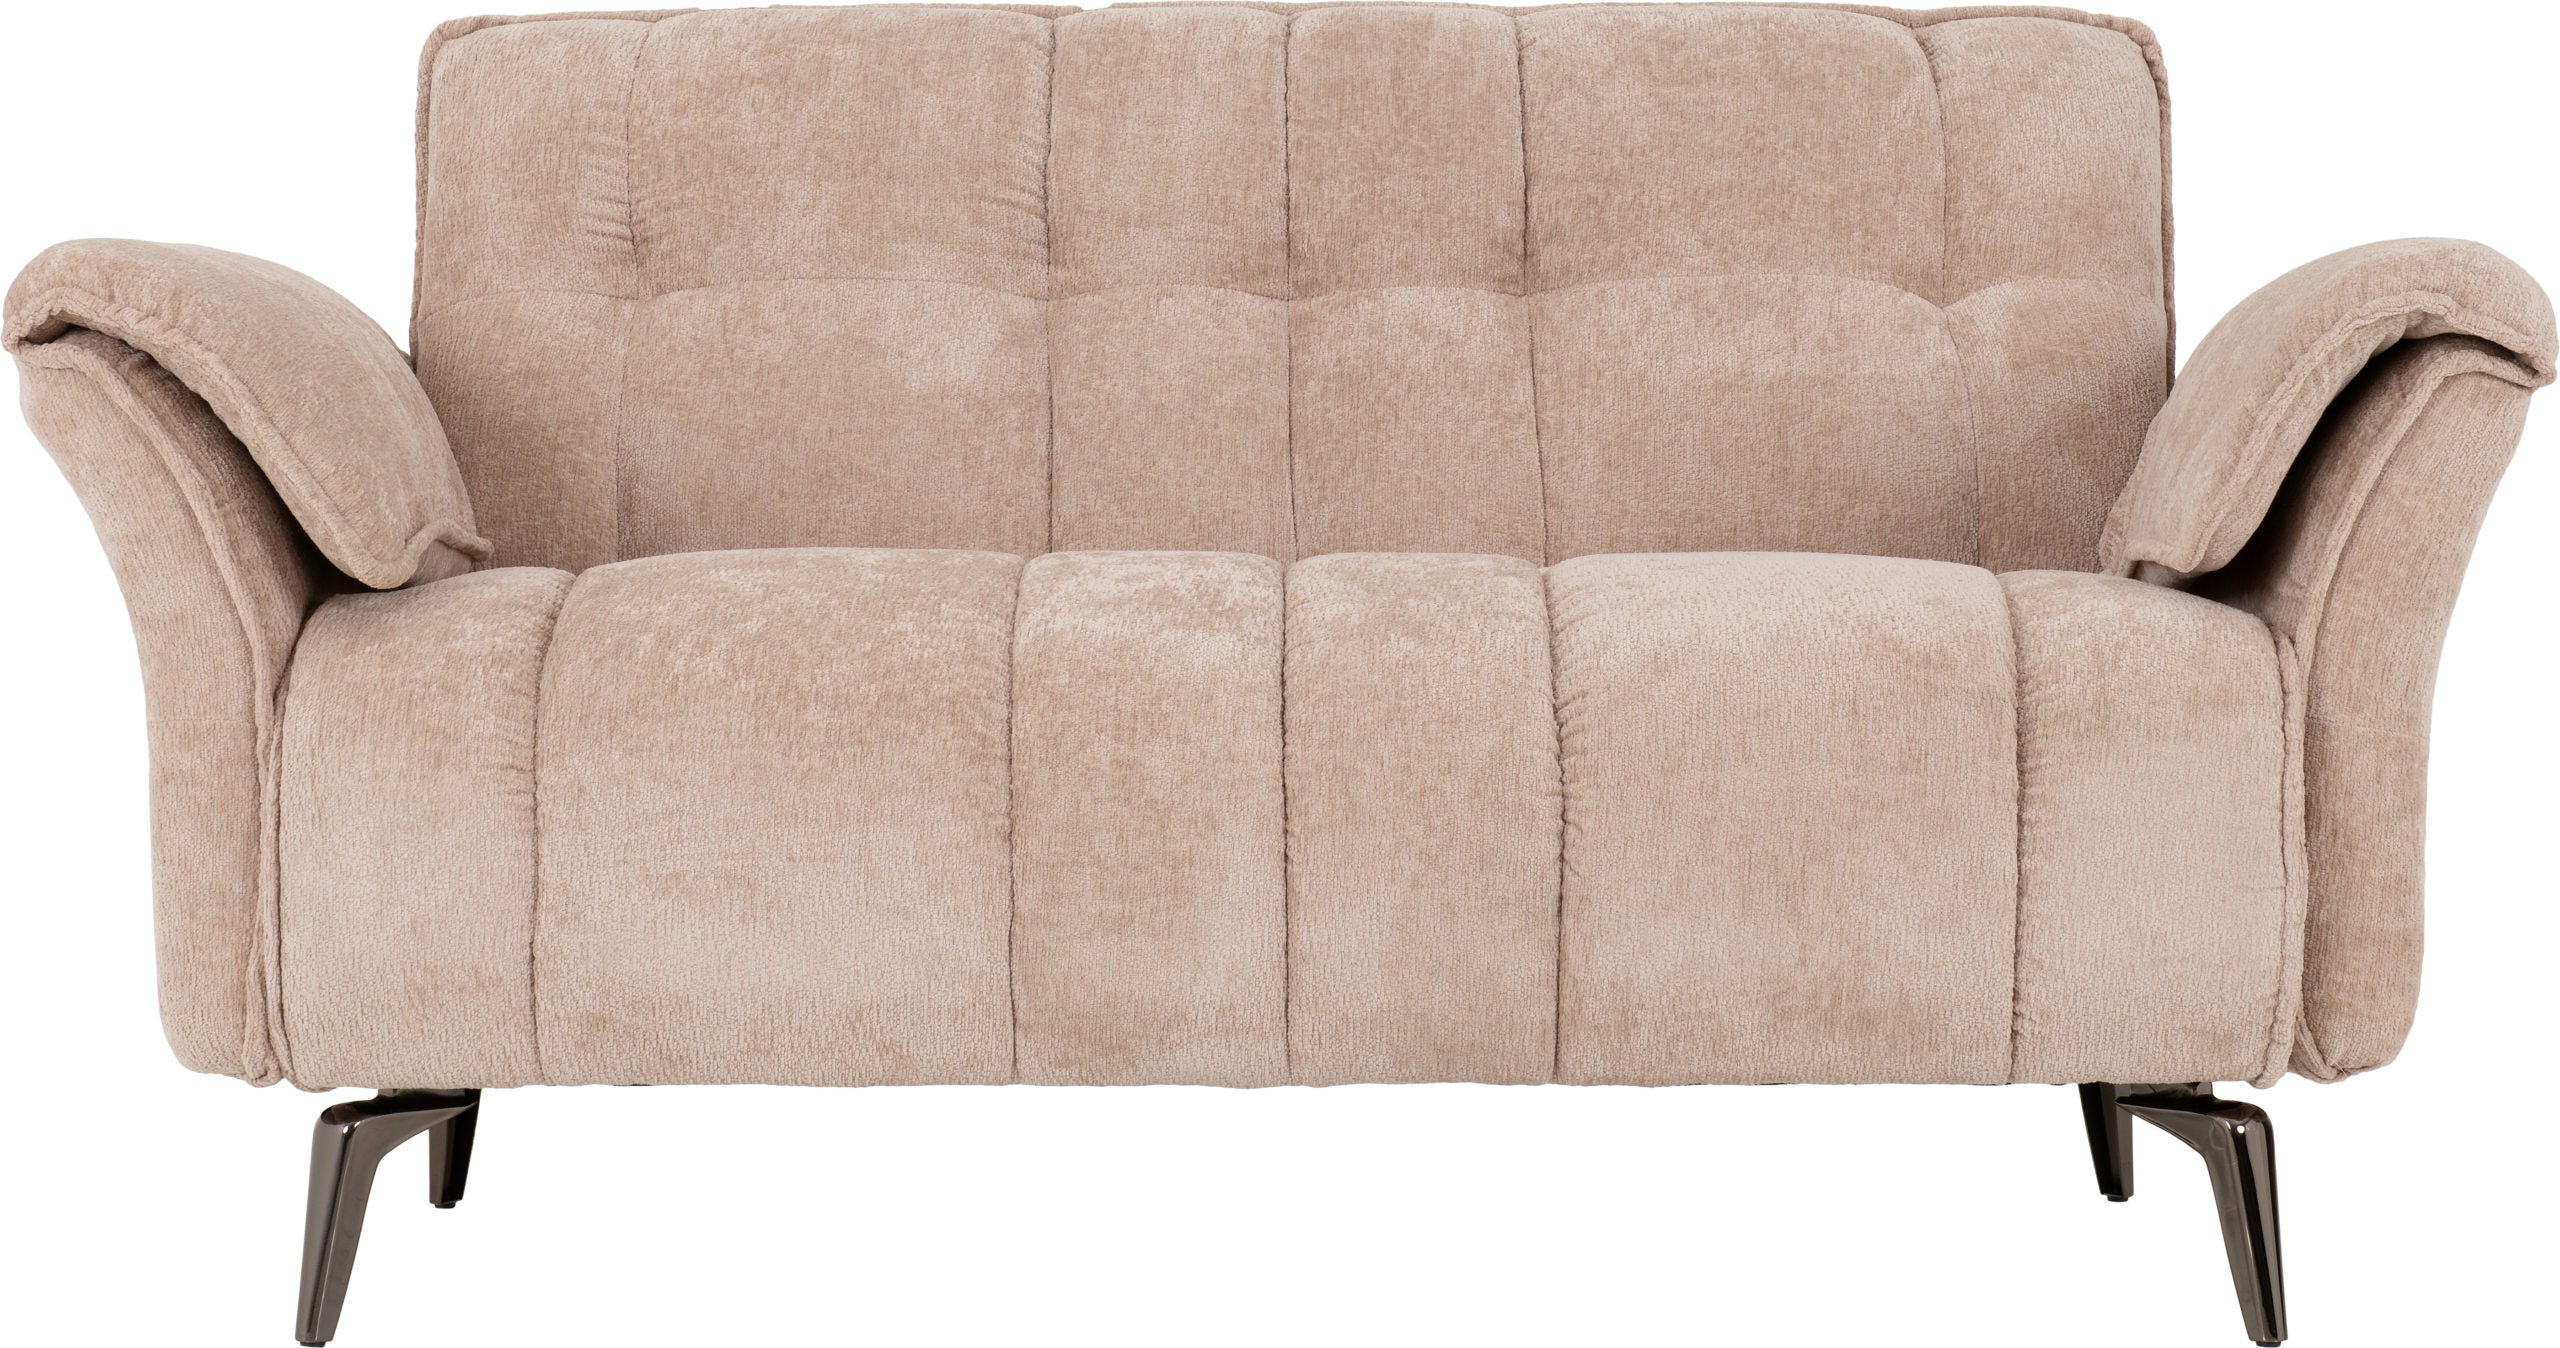 Amalfi 2 Seater Sofa in Champagne Fabric with Metal Legs 2 Man Delivery